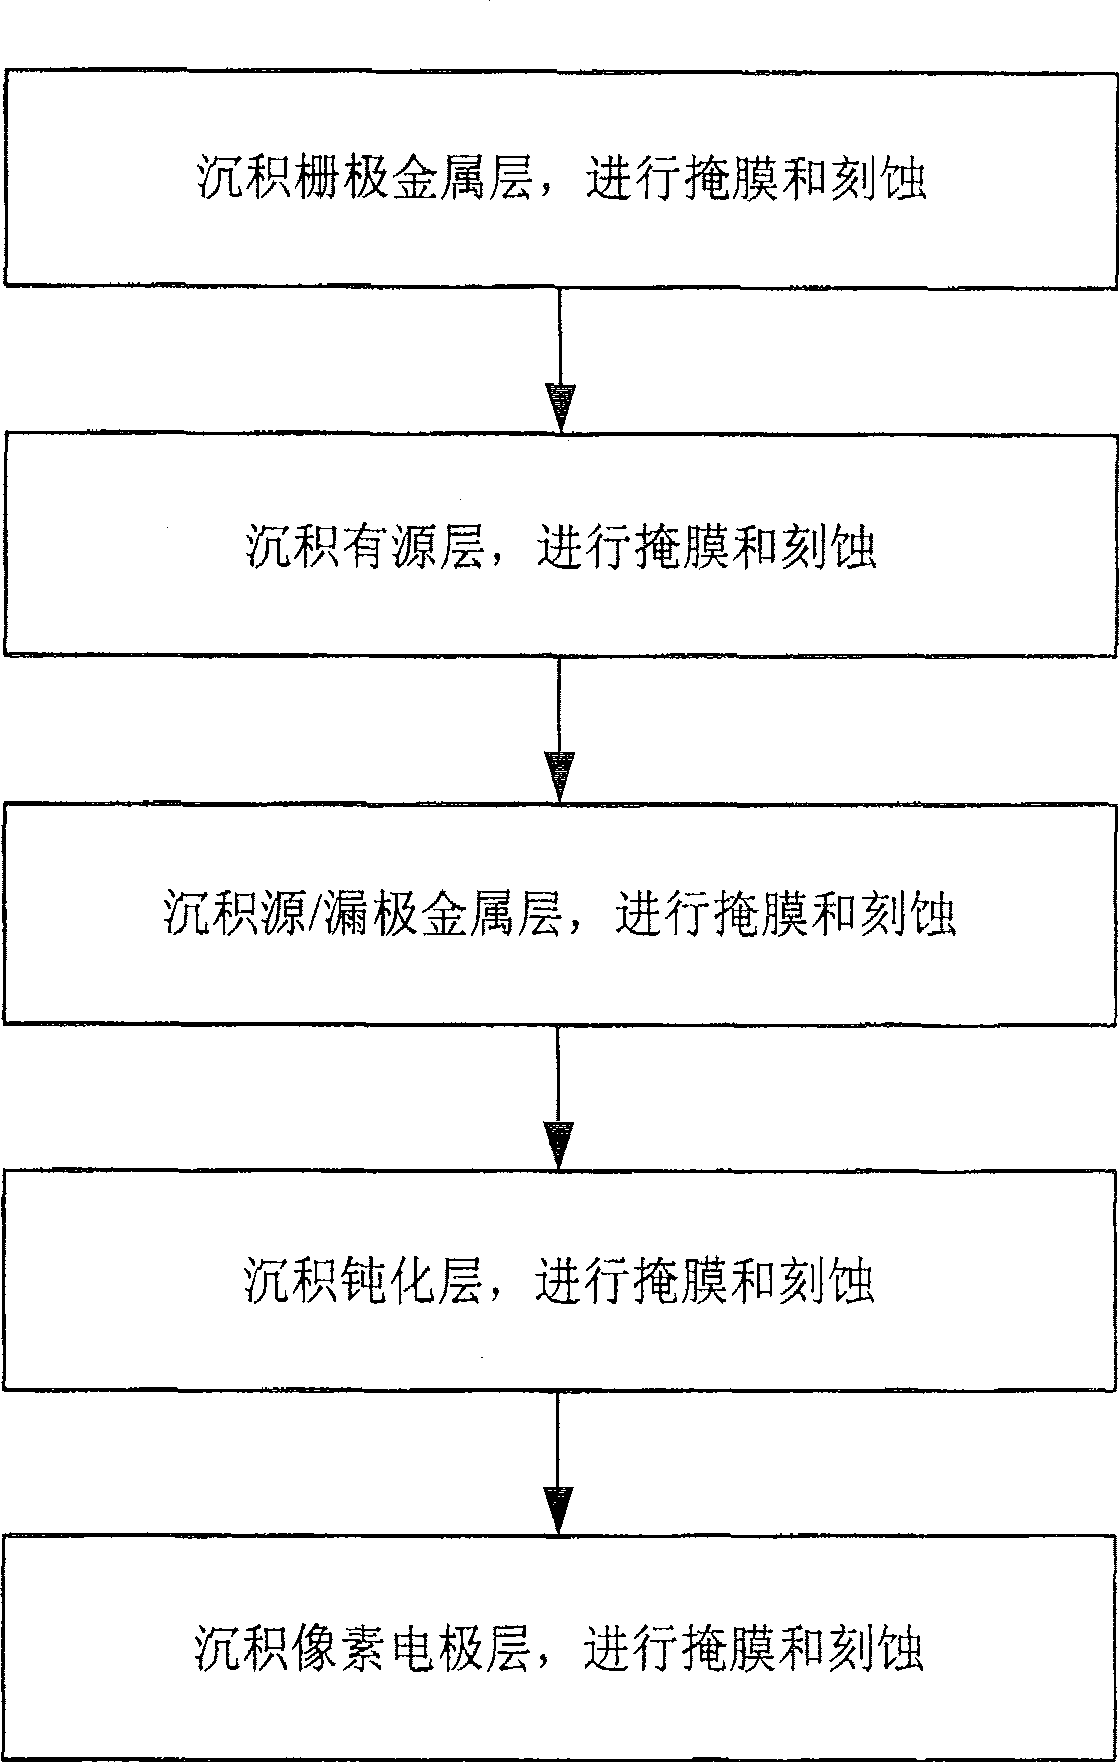 A TFT LCD array base plate and the manufacturing method thereof